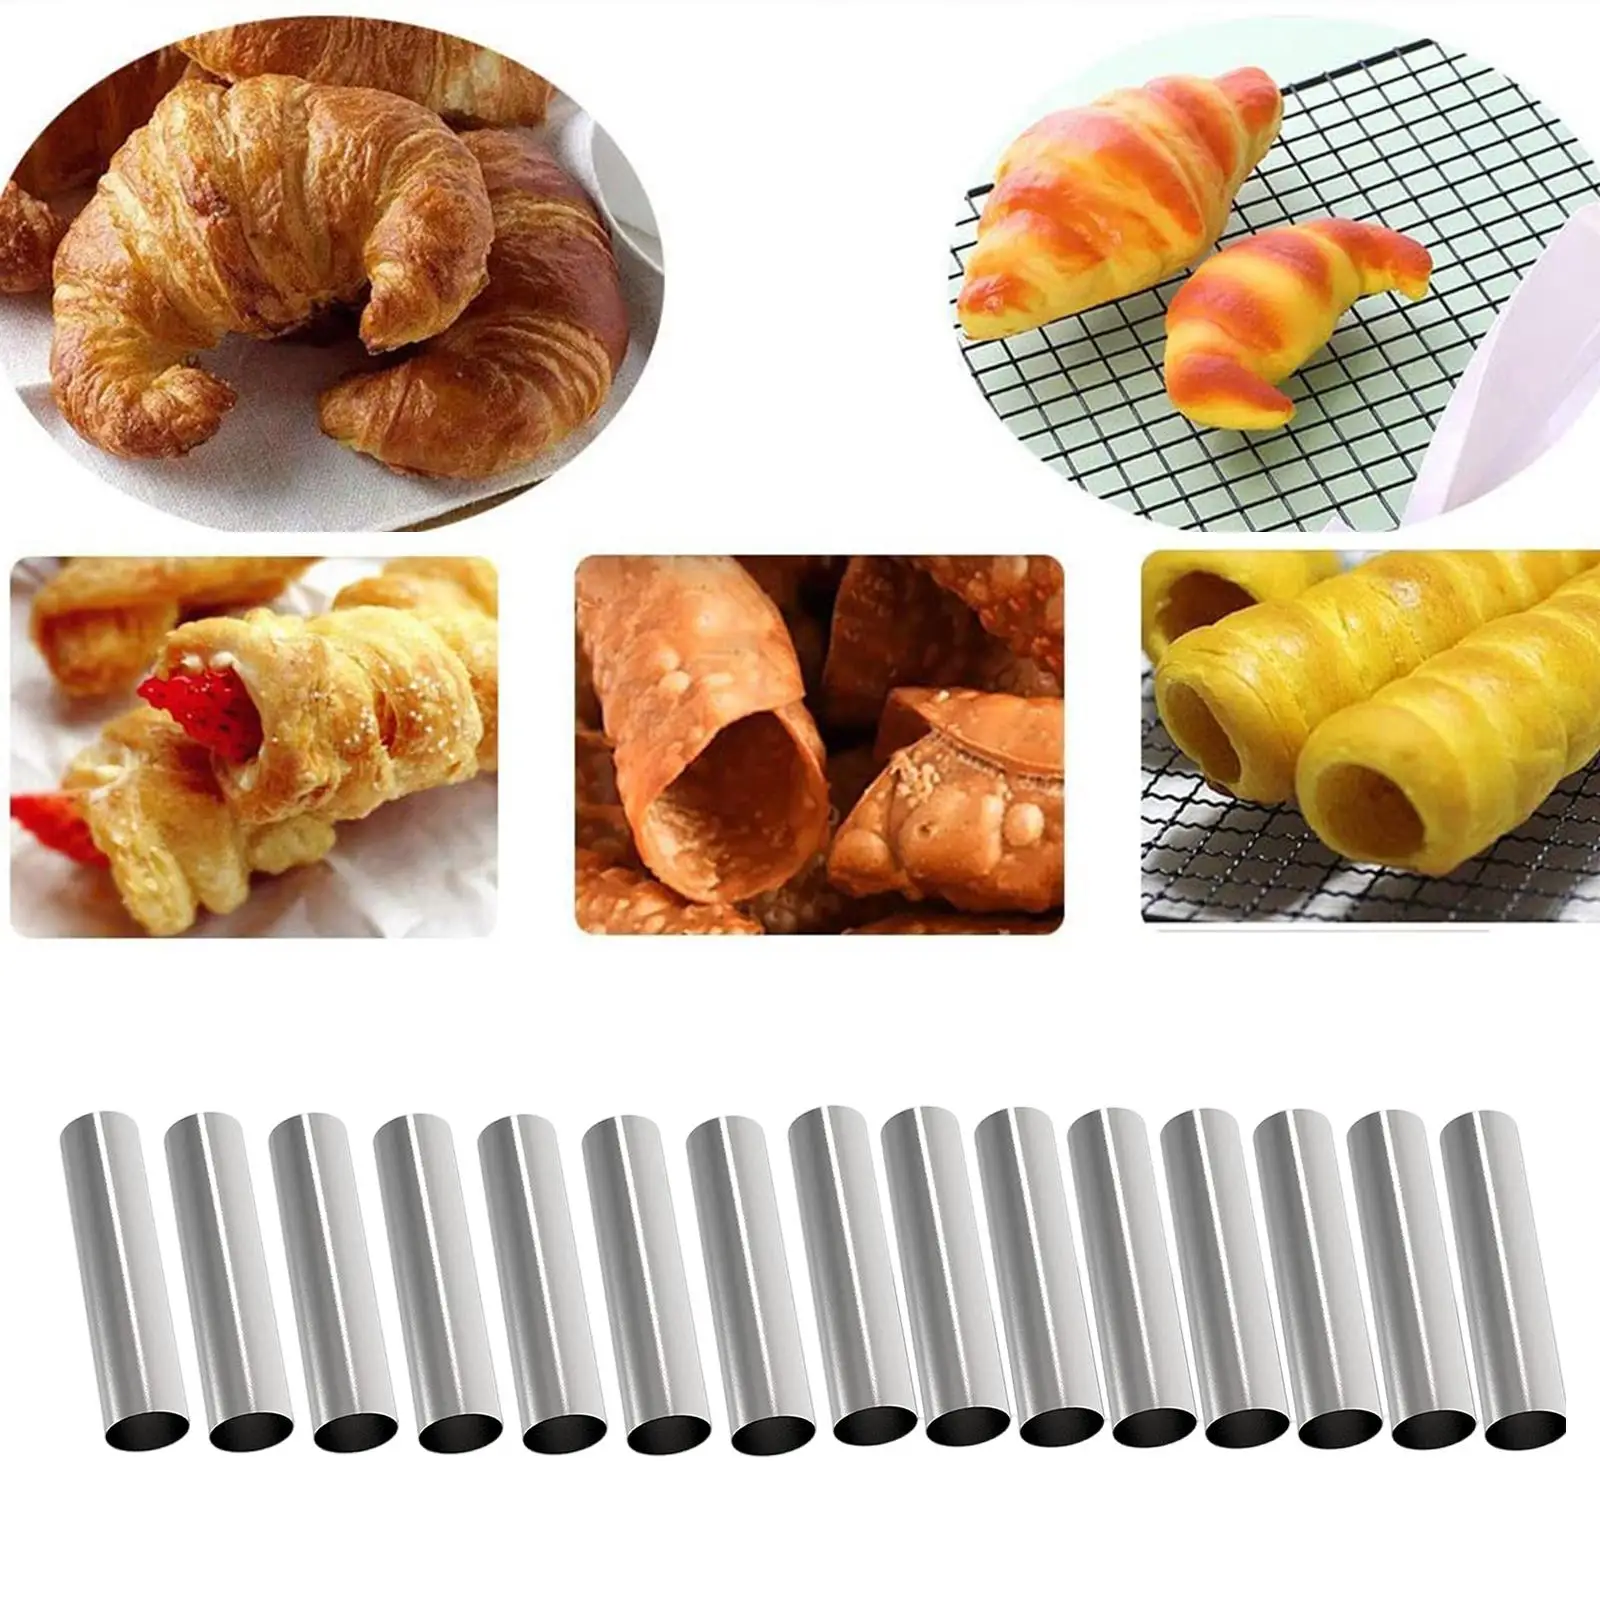 15Pcs Cannoli Form Tubes Pastry Utensils Cannoli Tubes Shells for Pancake Chocolate Cones